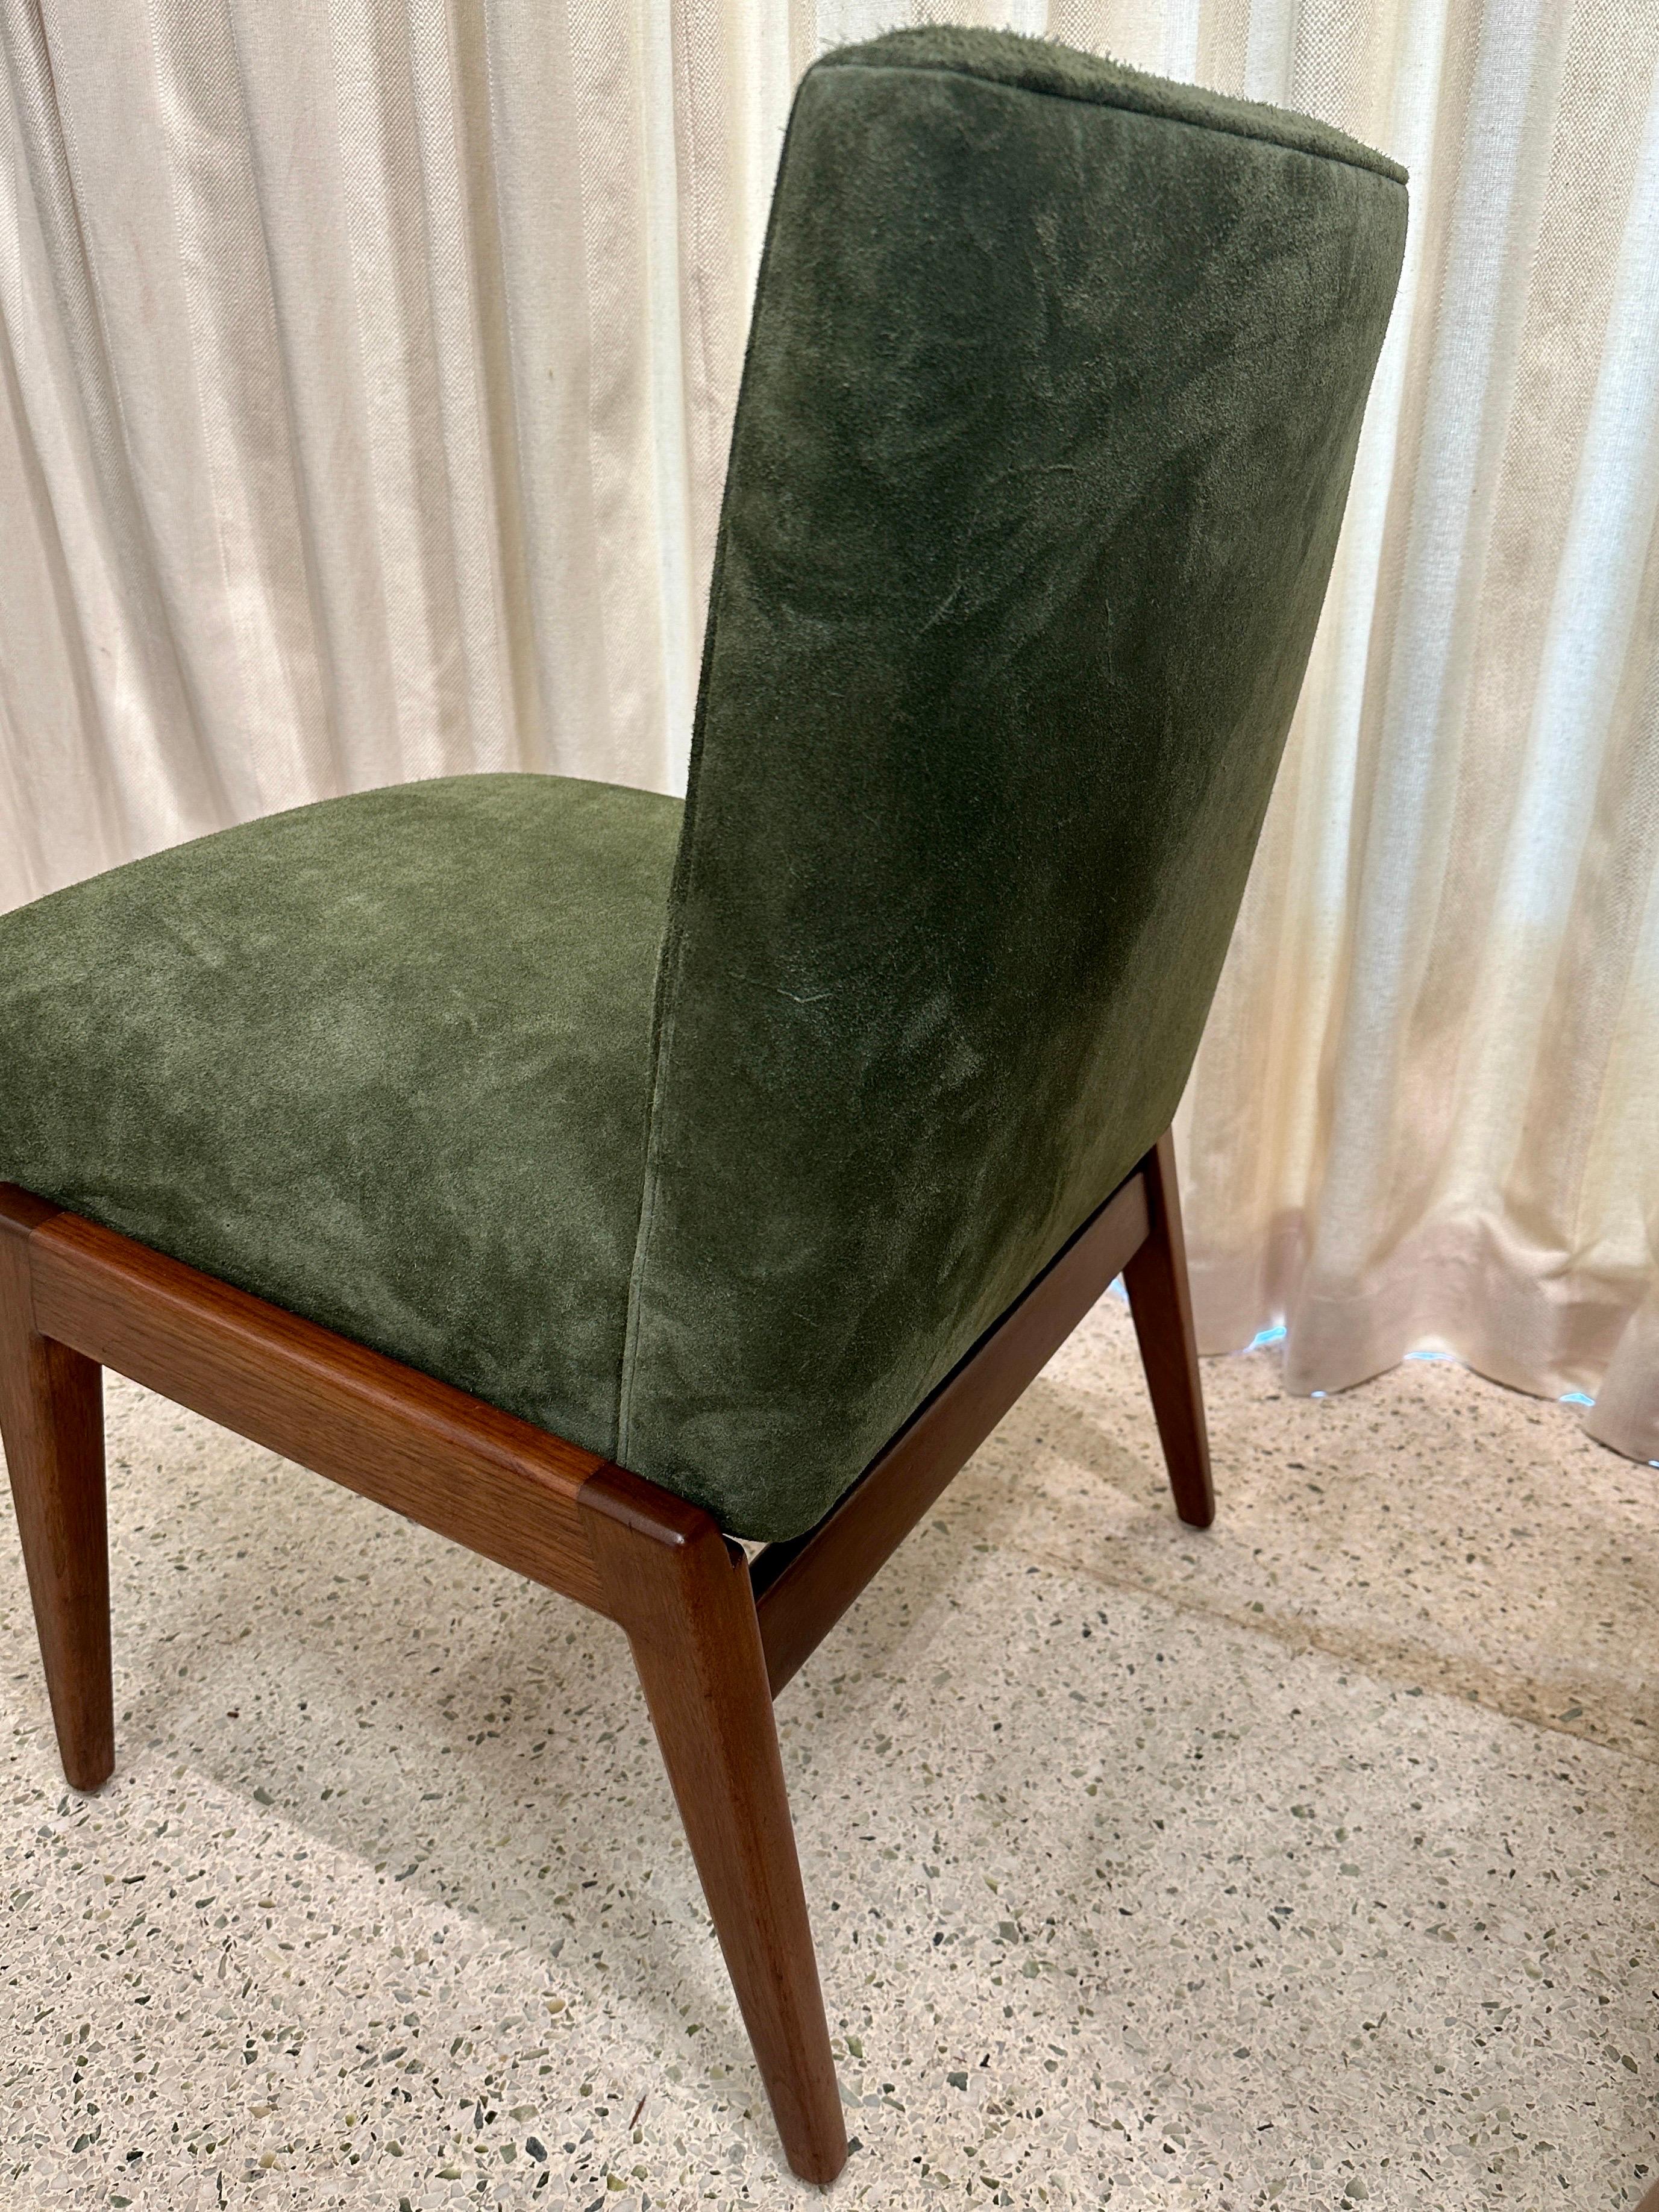 Original Vintage Jens Risom Chairs in Green Suede w/ Label, PAIR In Good Condition For Sale In East Hampton, NY